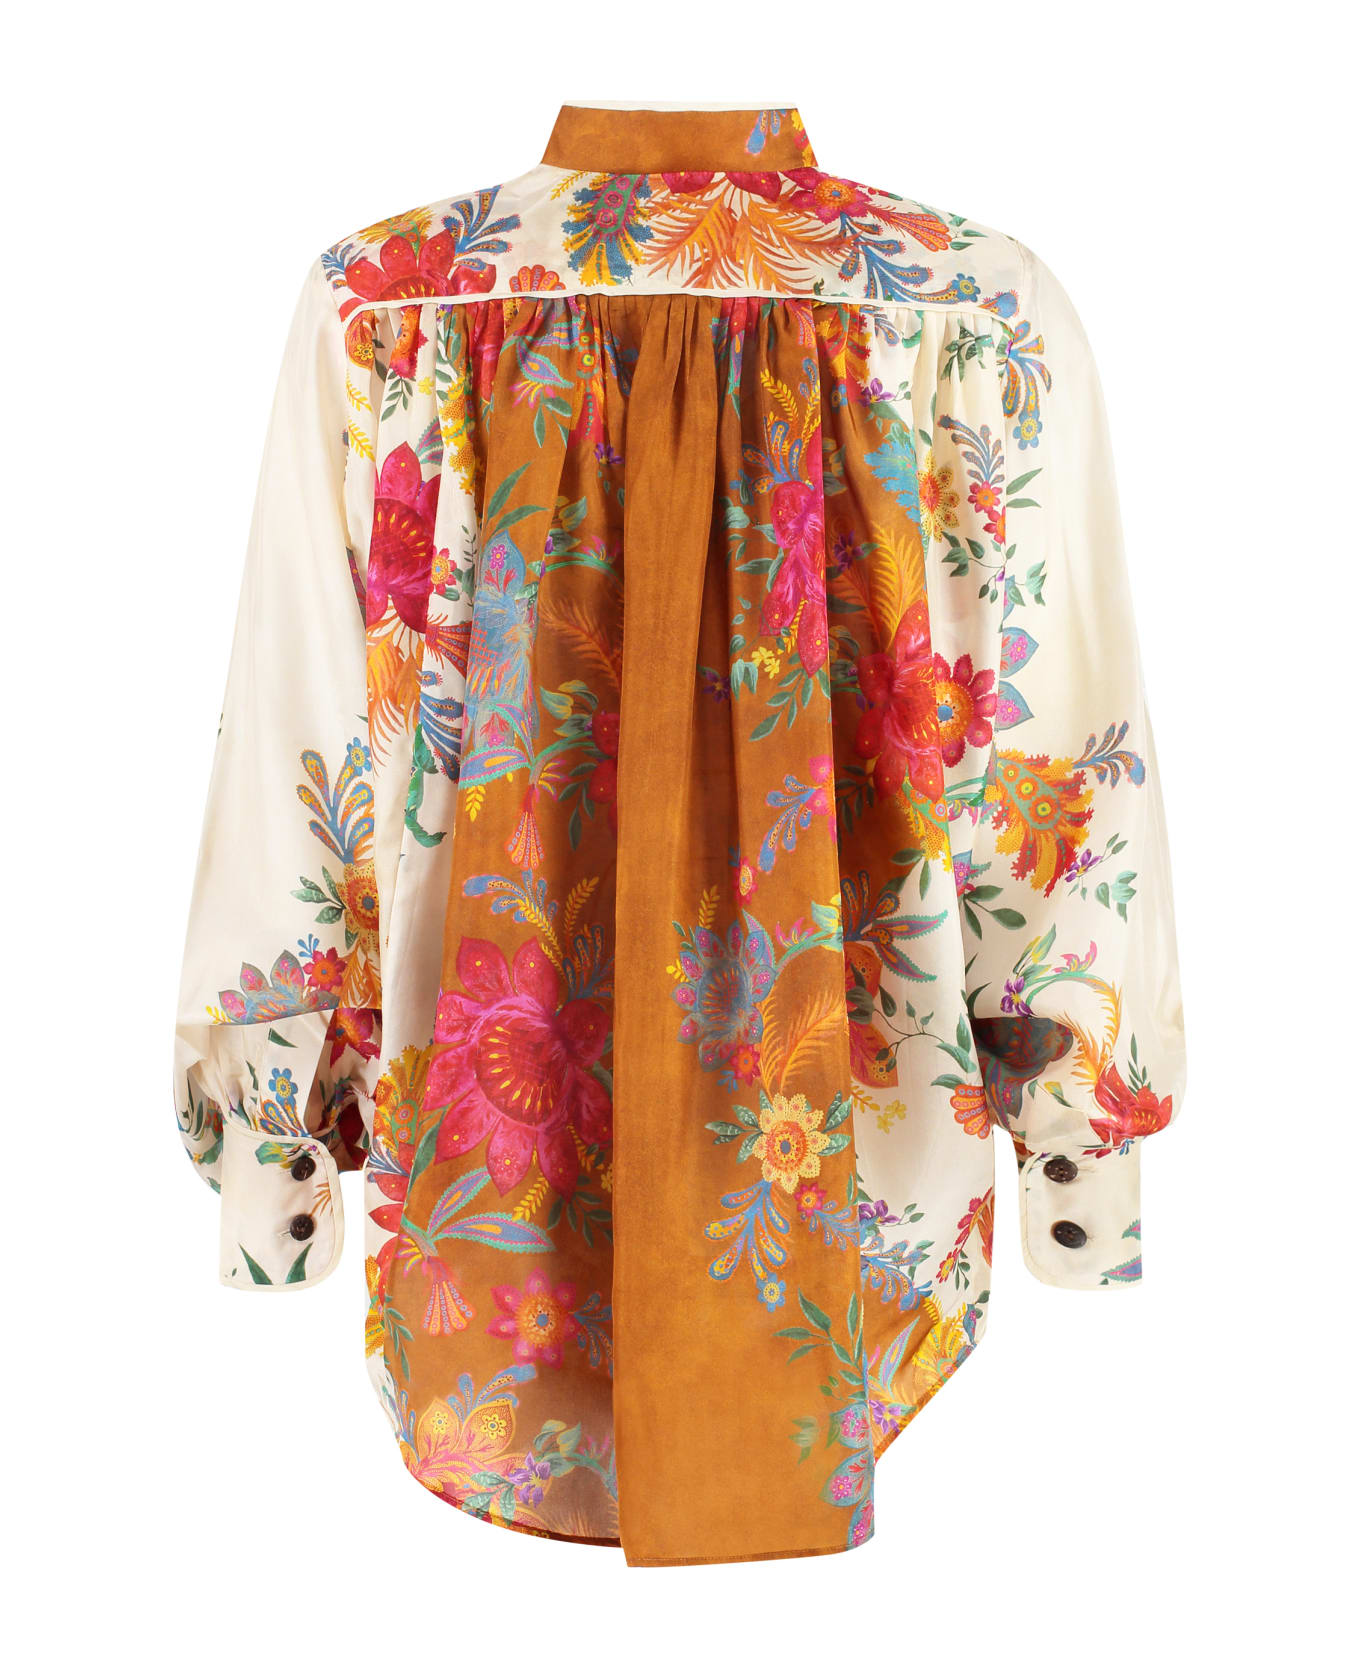 Zimmermann Ginger Relaxed Flowers Printed Silk Blouse - Cblf Cream Brown Floral シャツ